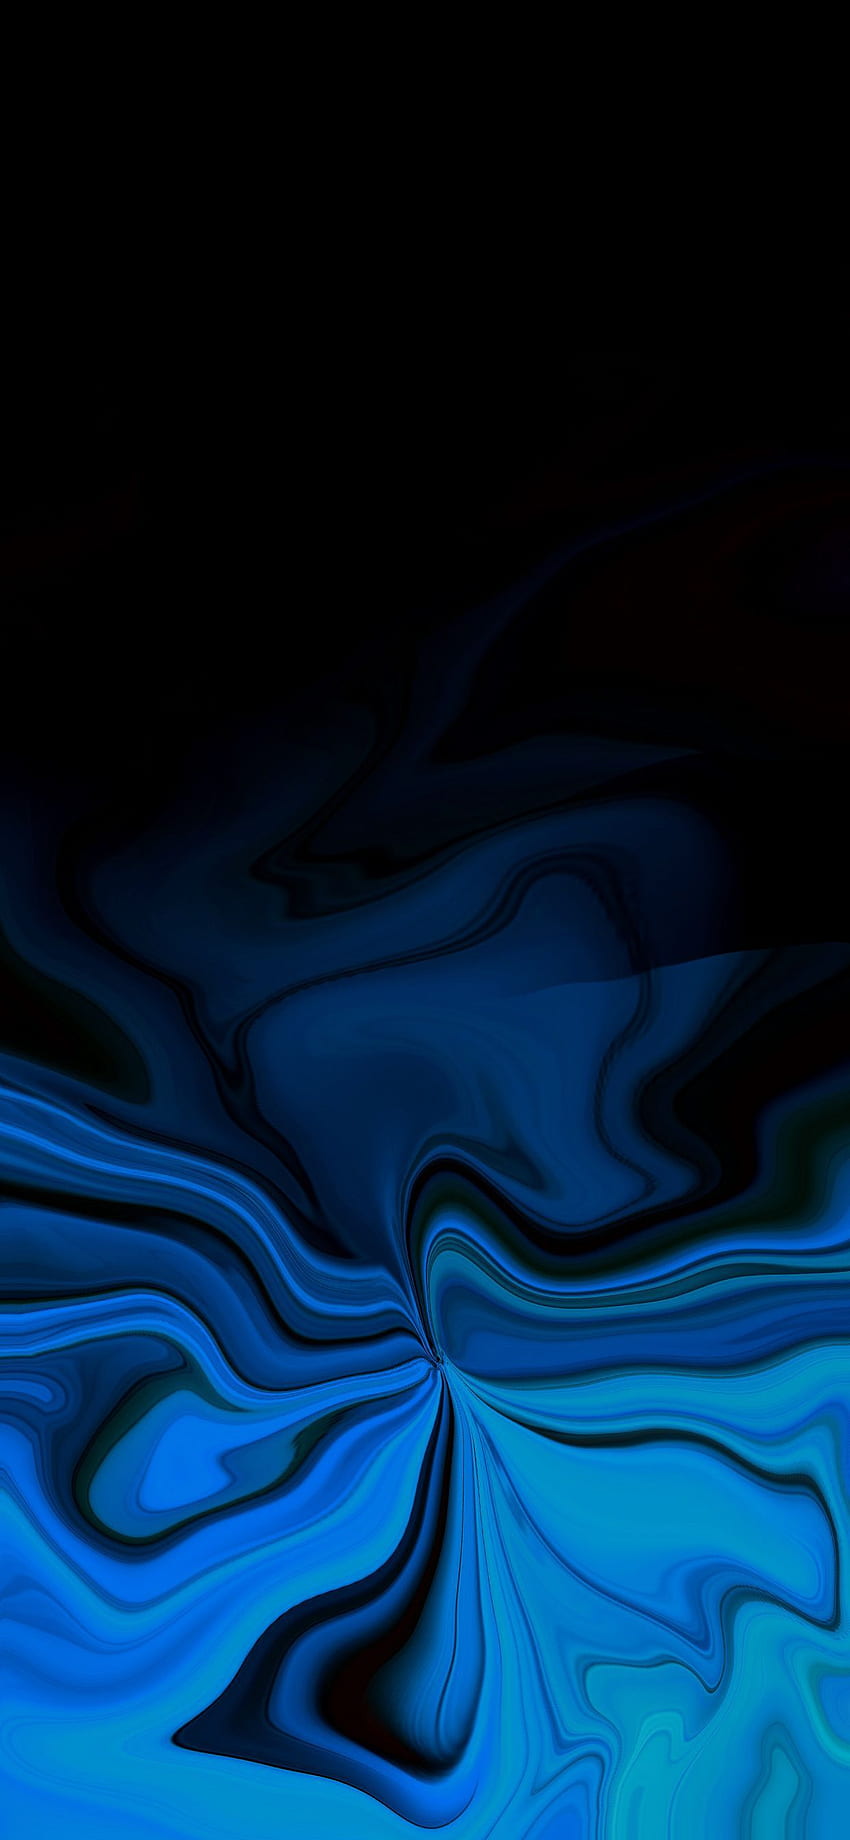 Neon Abstract Designed By ©Hotspot4U IMG_ - Google Drive. Unique , Graphic , Abstract design, Blue Abstract Neon HD phone wallpaper